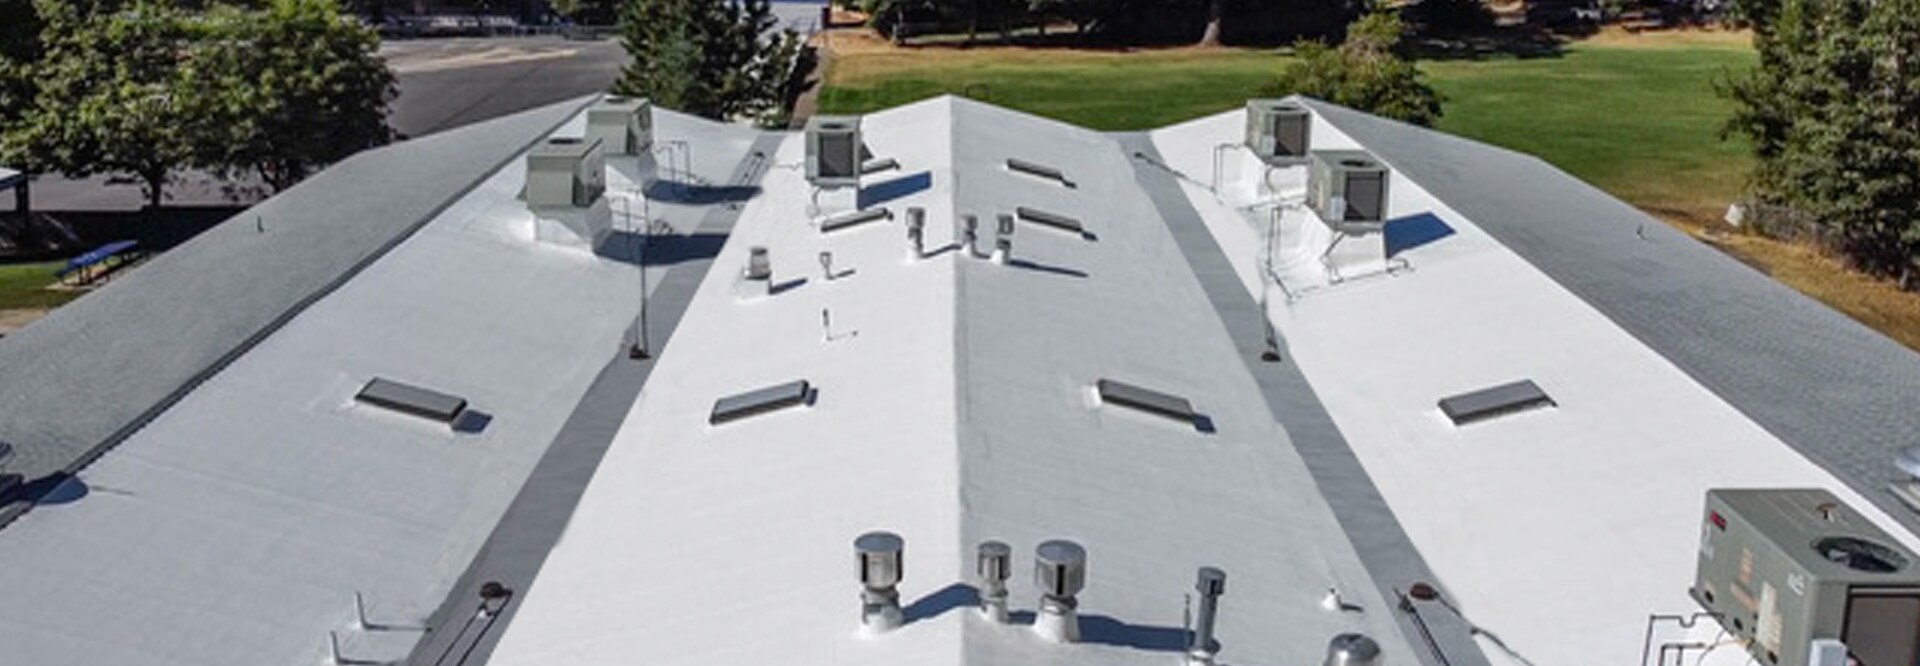 The roof of the Twain Harte Elementary School in CA used four different GAF roofing solutions